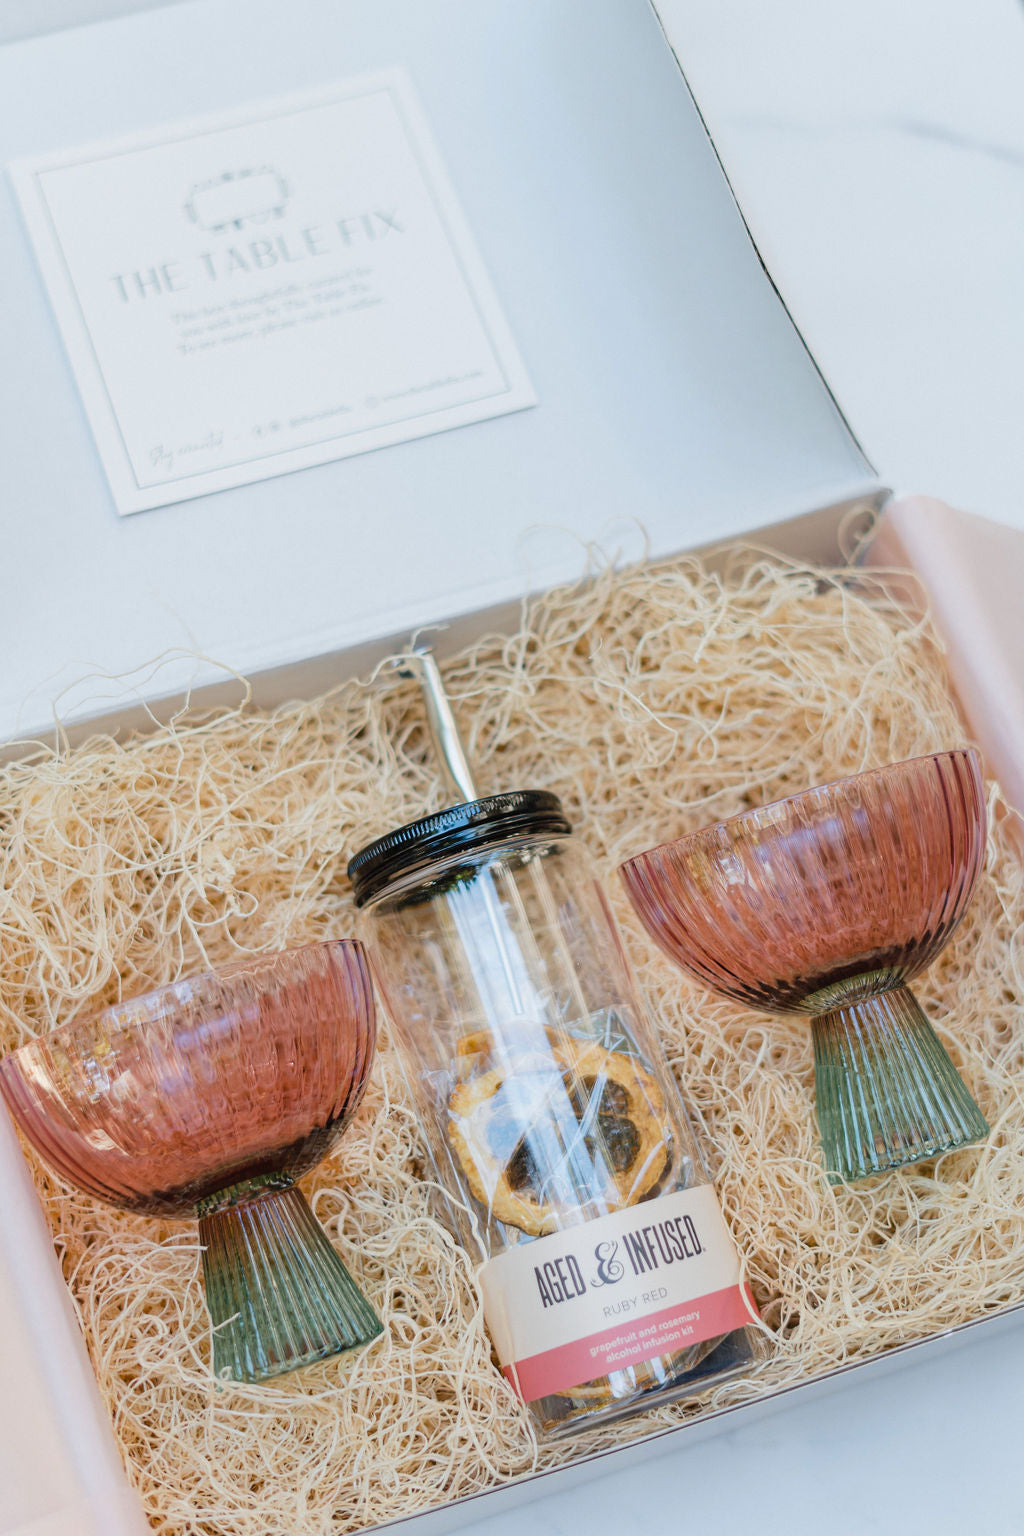 Coupe Cocktail Gift Set